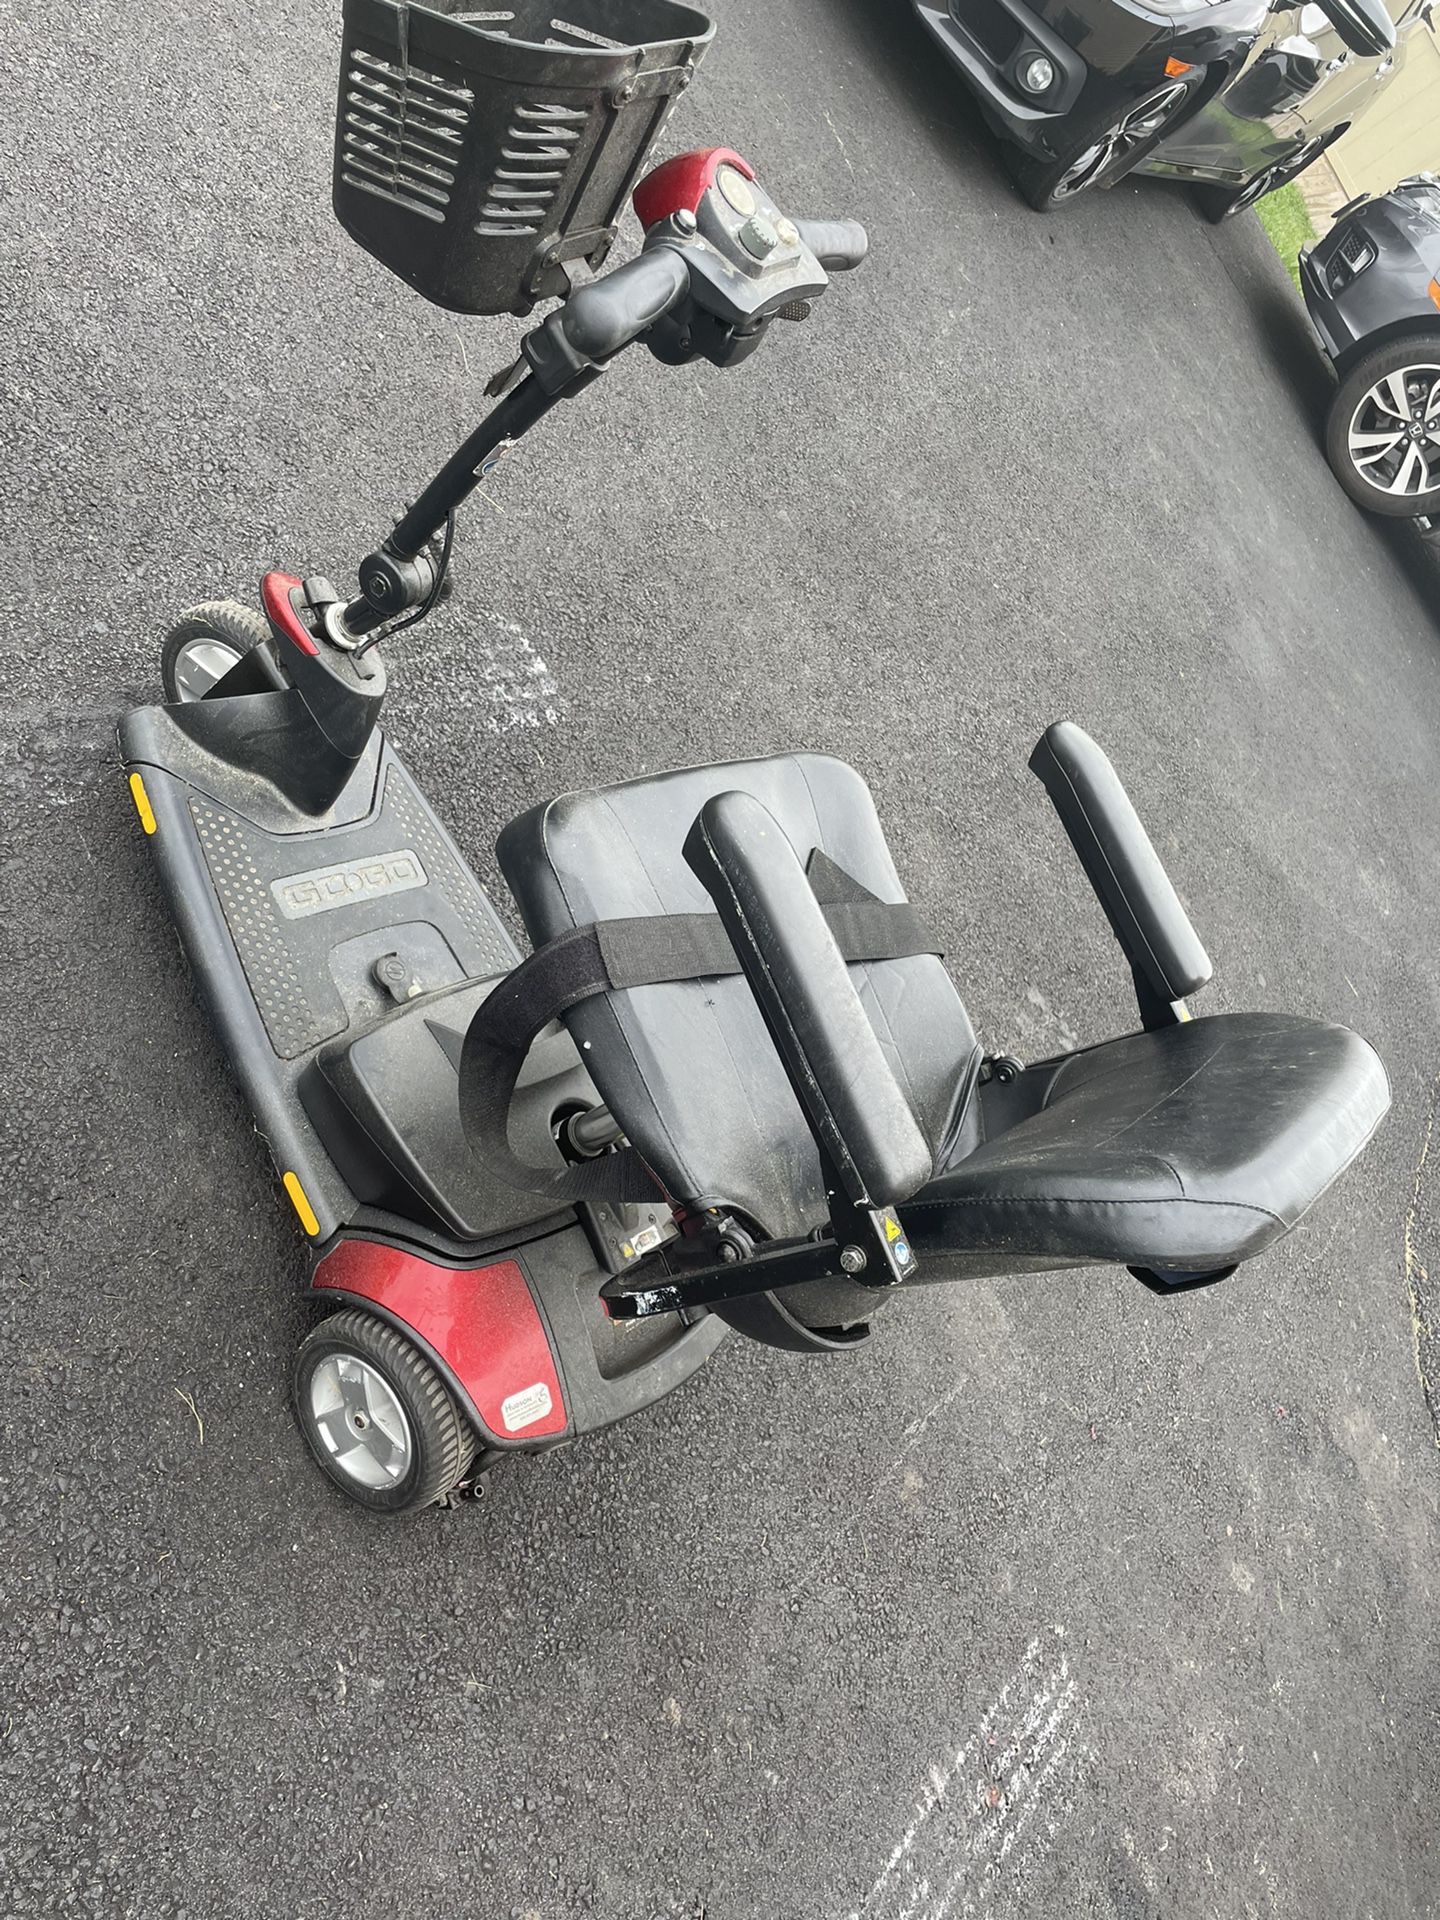 Motorized Mobility Scooter   Free, pick up.